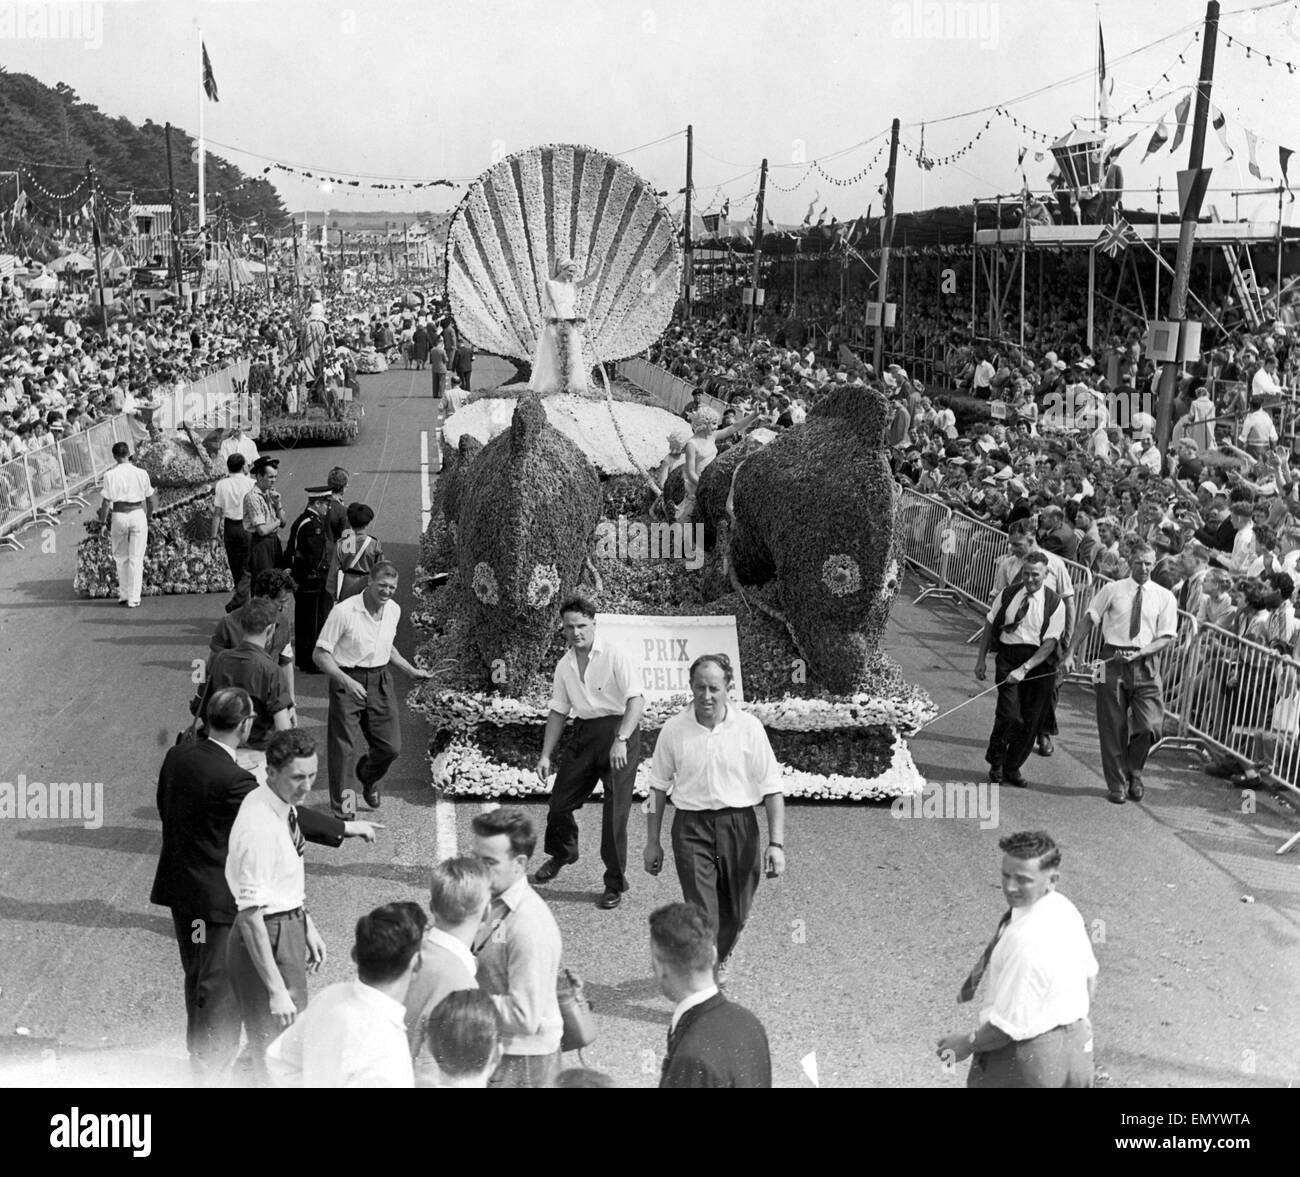 The annual Battle of Flowers carnival taking place on the island of Jersey in the Channel Islands. The procession moves along the street as crowds look on. Circa 1950. Stock Photo